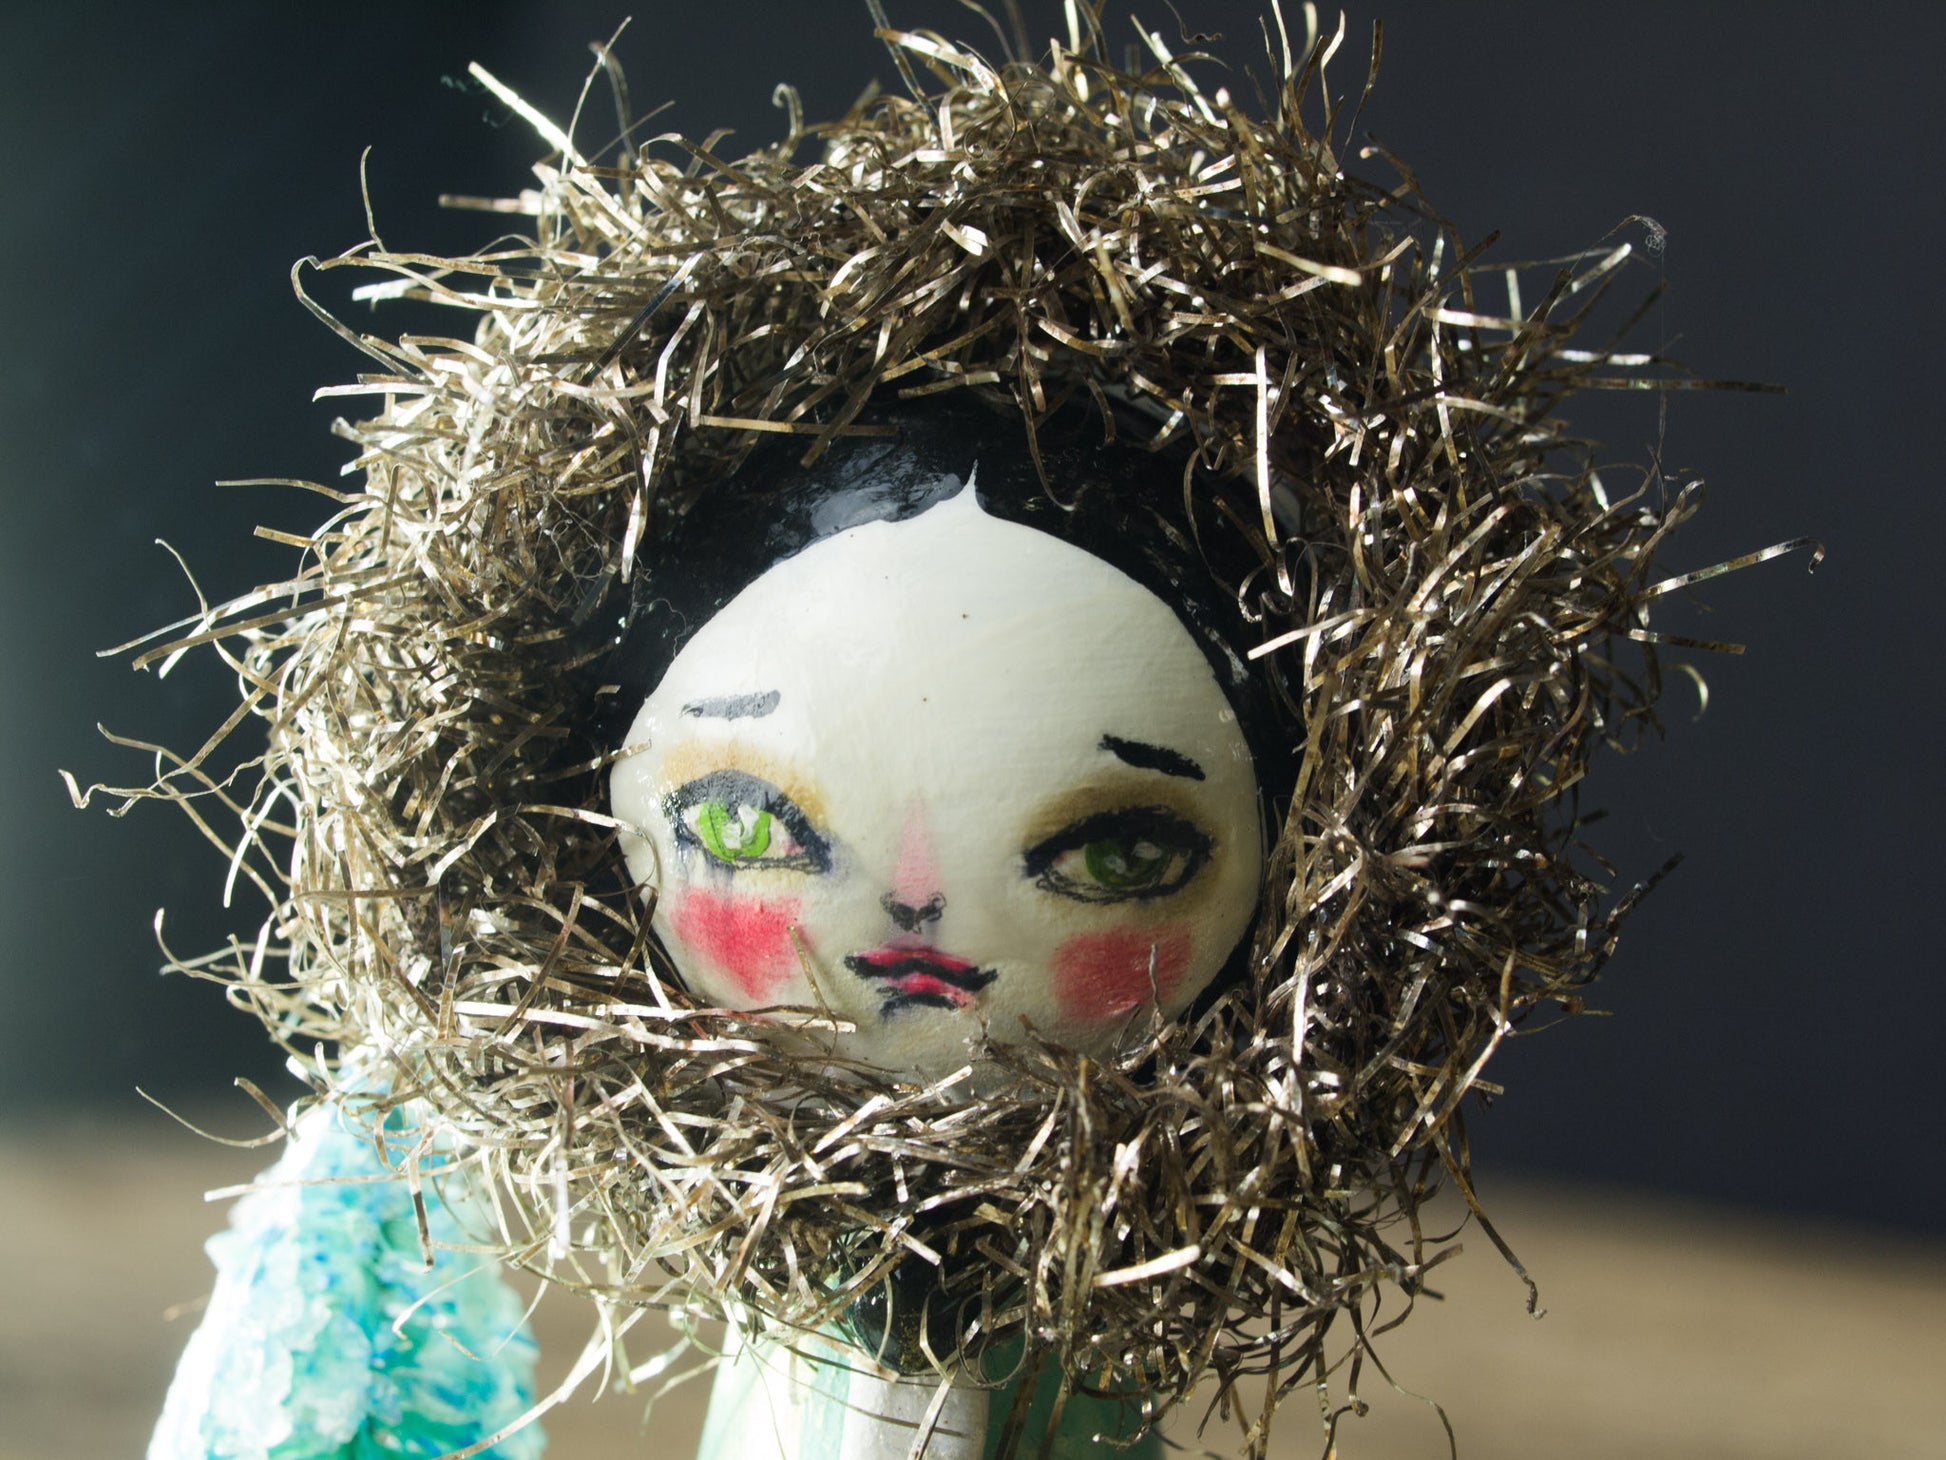 The queen of the North, a holiday wood kokeshi art doll created by Danita Art